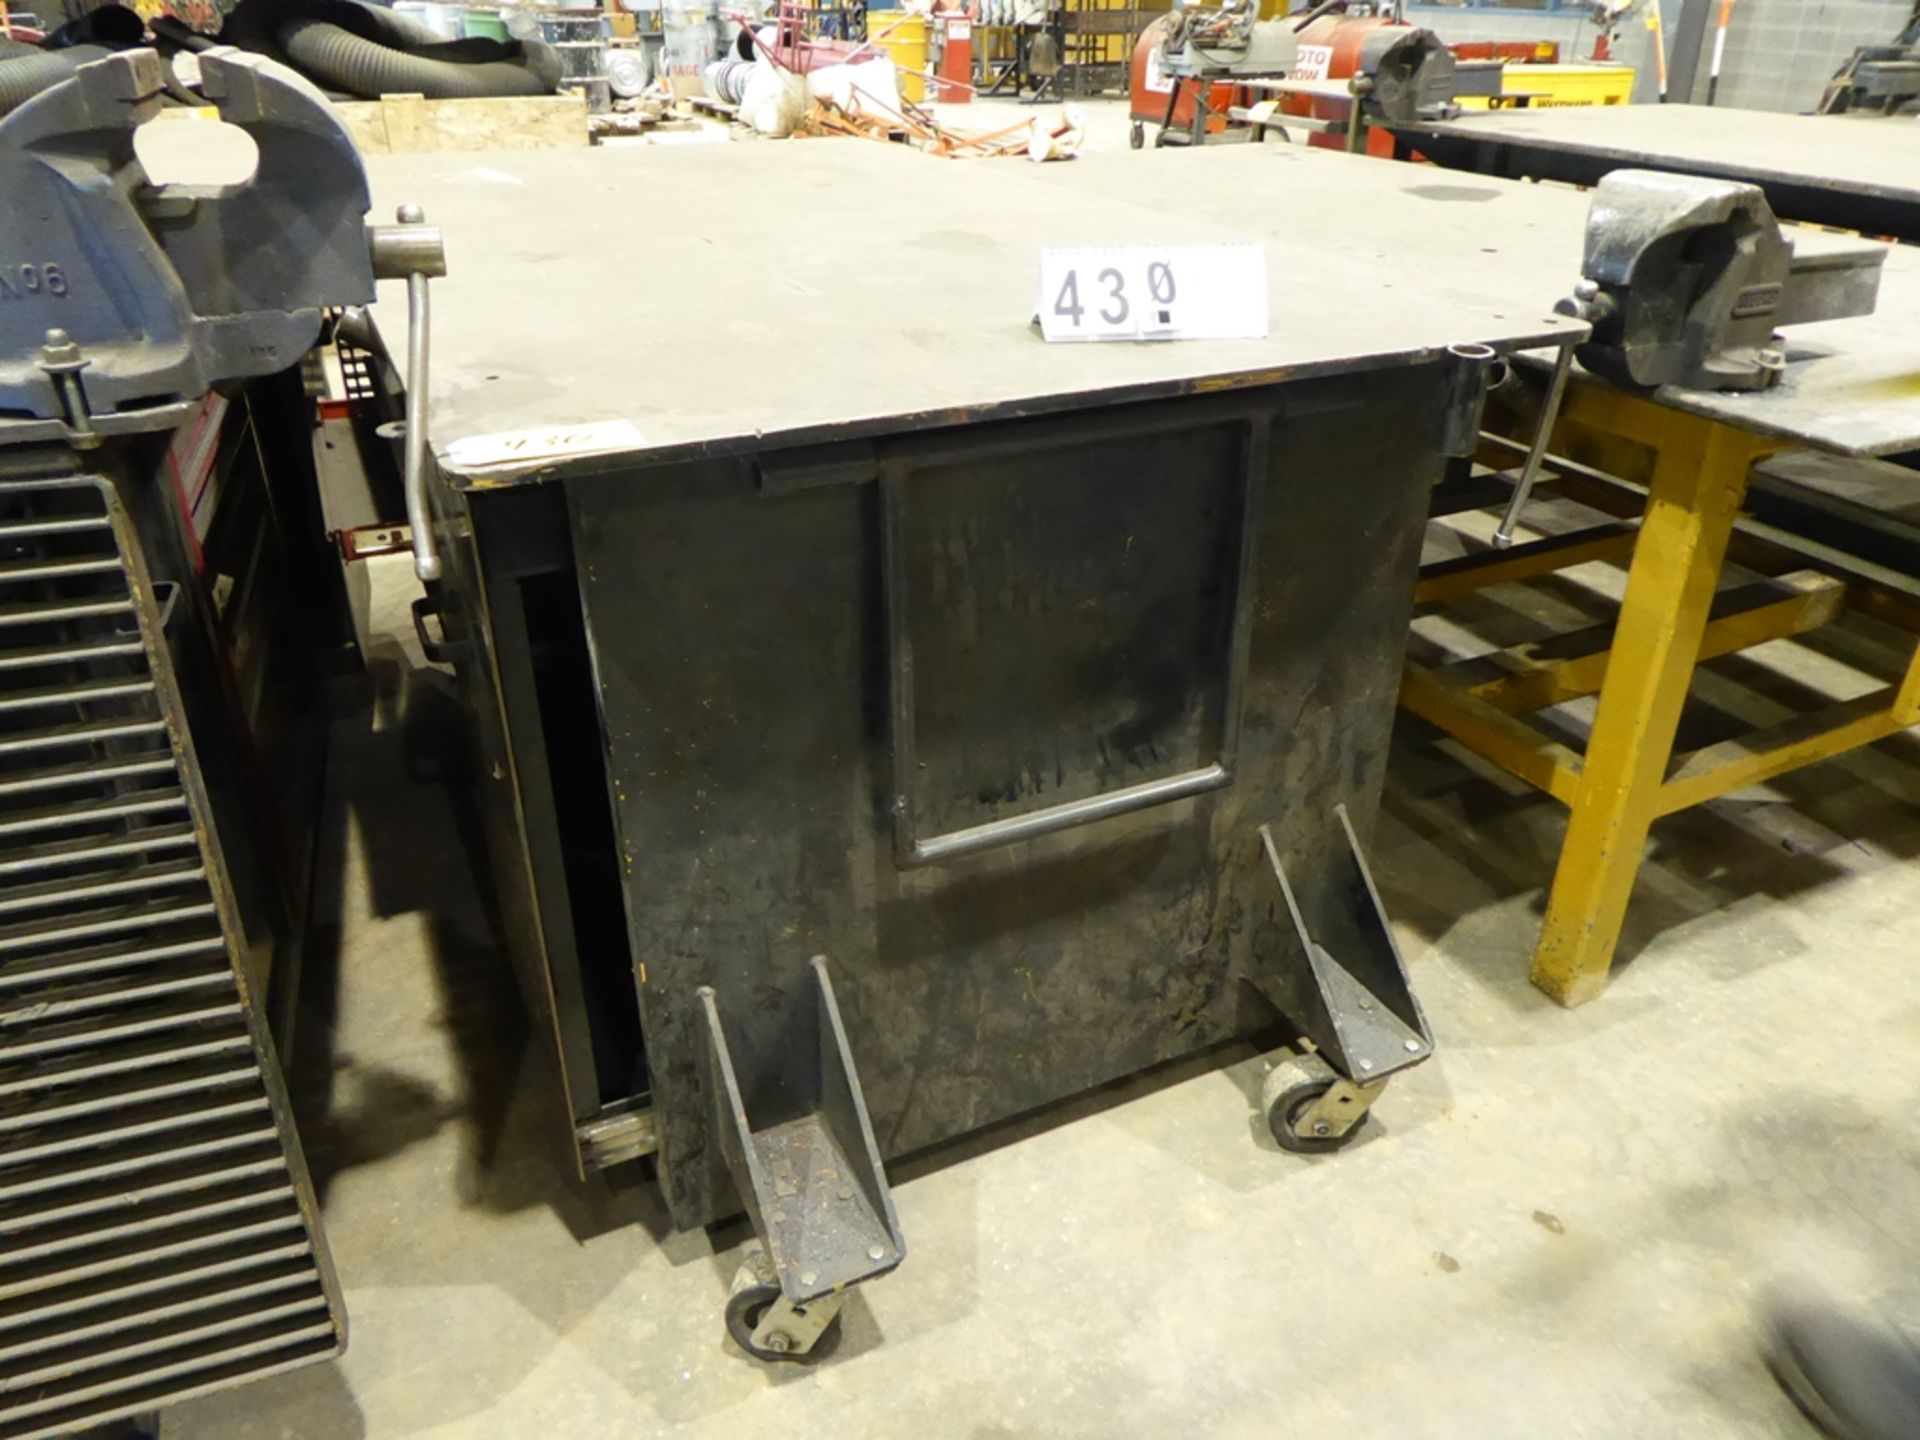 3'X7' STEEL WORK TABLE W/ CUTTING EXTENSIONS, TOOL BOXES, UNDER STORAGE